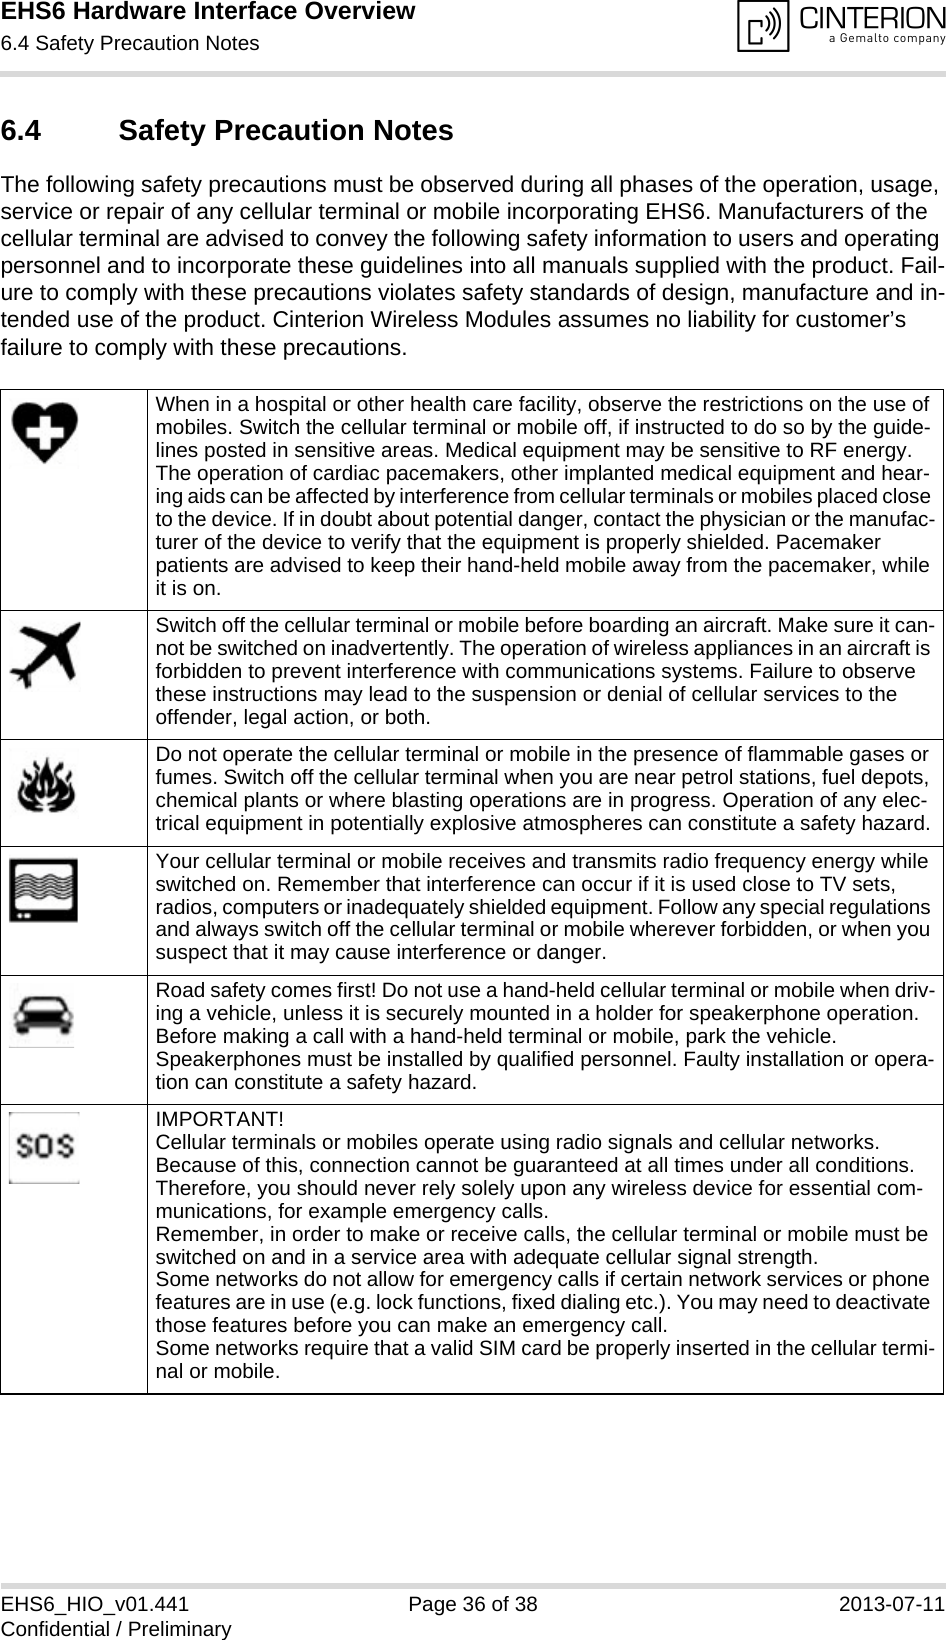 EHS6 Hardware Interface Overview6.4 Safety Precaution Notes36EHS6_HIO_v01.441 Page 36 of 38 2013-07-11Confidential / Preliminary6.4 Safety Precaution NotesThe following safety precautions must be observed during all phases of the operation, usage, service or repair of any cellular terminal or mobile incorporating EHS6. Manufacturers of the cellular terminal are advised to convey the following safety information to users and operating personnel and to incorporate these guidelines into all manuals supplied with the product. Fail-ure to comply with these precautions violates safety standards of design, manufacture and in-tended use of the product. Cinterion Wireless Modules assumes no liability for customer’s failure to comply with these precautions.When in a hospital or other health care facility, observe the restrictions on the use of mobiles. Switch the cellular terminal or mobile off, if instructed to do so by the guide-lines posted in sensitive areas. Medical equipment may be sensitive to RF energy. The operation of cardiac pacemakers, other implanted medical equipment and hear-ing aids can be affected by interference from cellular terminals or mobiles placed close to the device. If in doubt about potential danger, contact the physician or the manufac-turer of the device to verify that the equipment is properly shielded. Pacemaker patients are advised to keep their hand-held mobile away from the pacemaker, while it is on. Switch off the cellular terminal or mobile before boarding an aircraft. Make sure it can-not be switched on inadvertently. The operation of wireless appliances in an aircraft is forbidden to prevent interference with communications systems. Failure to observe these instructions may lead to the suspension or denial of cellular services to the offender, legal action, or both.Do not operate the cellular terminal or mobile in the presence of flammable gases or fumes. Switch off the cellular terminal when you are near petrol stations, fuel depots, chemical plants or where blasting operations are in progress. Operation of any elec-trical equipment in potentially explosive atmospheres can constitute a safety hazard.Your cellular terminal or mobile receives and transmits radio frequency energy while switched on. Remember that interference can occur if it is used close to TV sets, radios, computers or inadequately shielded equipment. Follow any special regulations and always switch off the cellular terminal or mobile wherever forbidden, or when you suspect that it may cause interference or danger.Road safety comes first! Do not use a hand-held cellular terminal or mobile when driv-ing a vehicle, unless it is securely mounted in a holder for speakerphone operation. Before making a call with a hand-held terminal or mobile, park the vehicle. Speakerphones must be installed by qualified personnel. Faulty installation or opera-tion can constitute a safety hazard.IMPORTANT!Cellular terminals or mobiles operate using radio signals and cellular networks. Because of this, connection cannot be guaranteed at all times under all conditions. Therefore, you should never rely solely upon any wireless device for essential com-munications, for example emergency calls. Remember, in order to make or receive calls, the cellular terminal or mobile must be switched on and in a service area with adequate cellular signal strength. Some networks do not allow for emergency calls if certain network services or phone features are in use (e.g. lock functions, fixed dialing etc.). You may need to deactivate those features before you can make an emergency call.Some networks require that a valid SIM card be properly inserted in the cellular termi-nal or mobile.